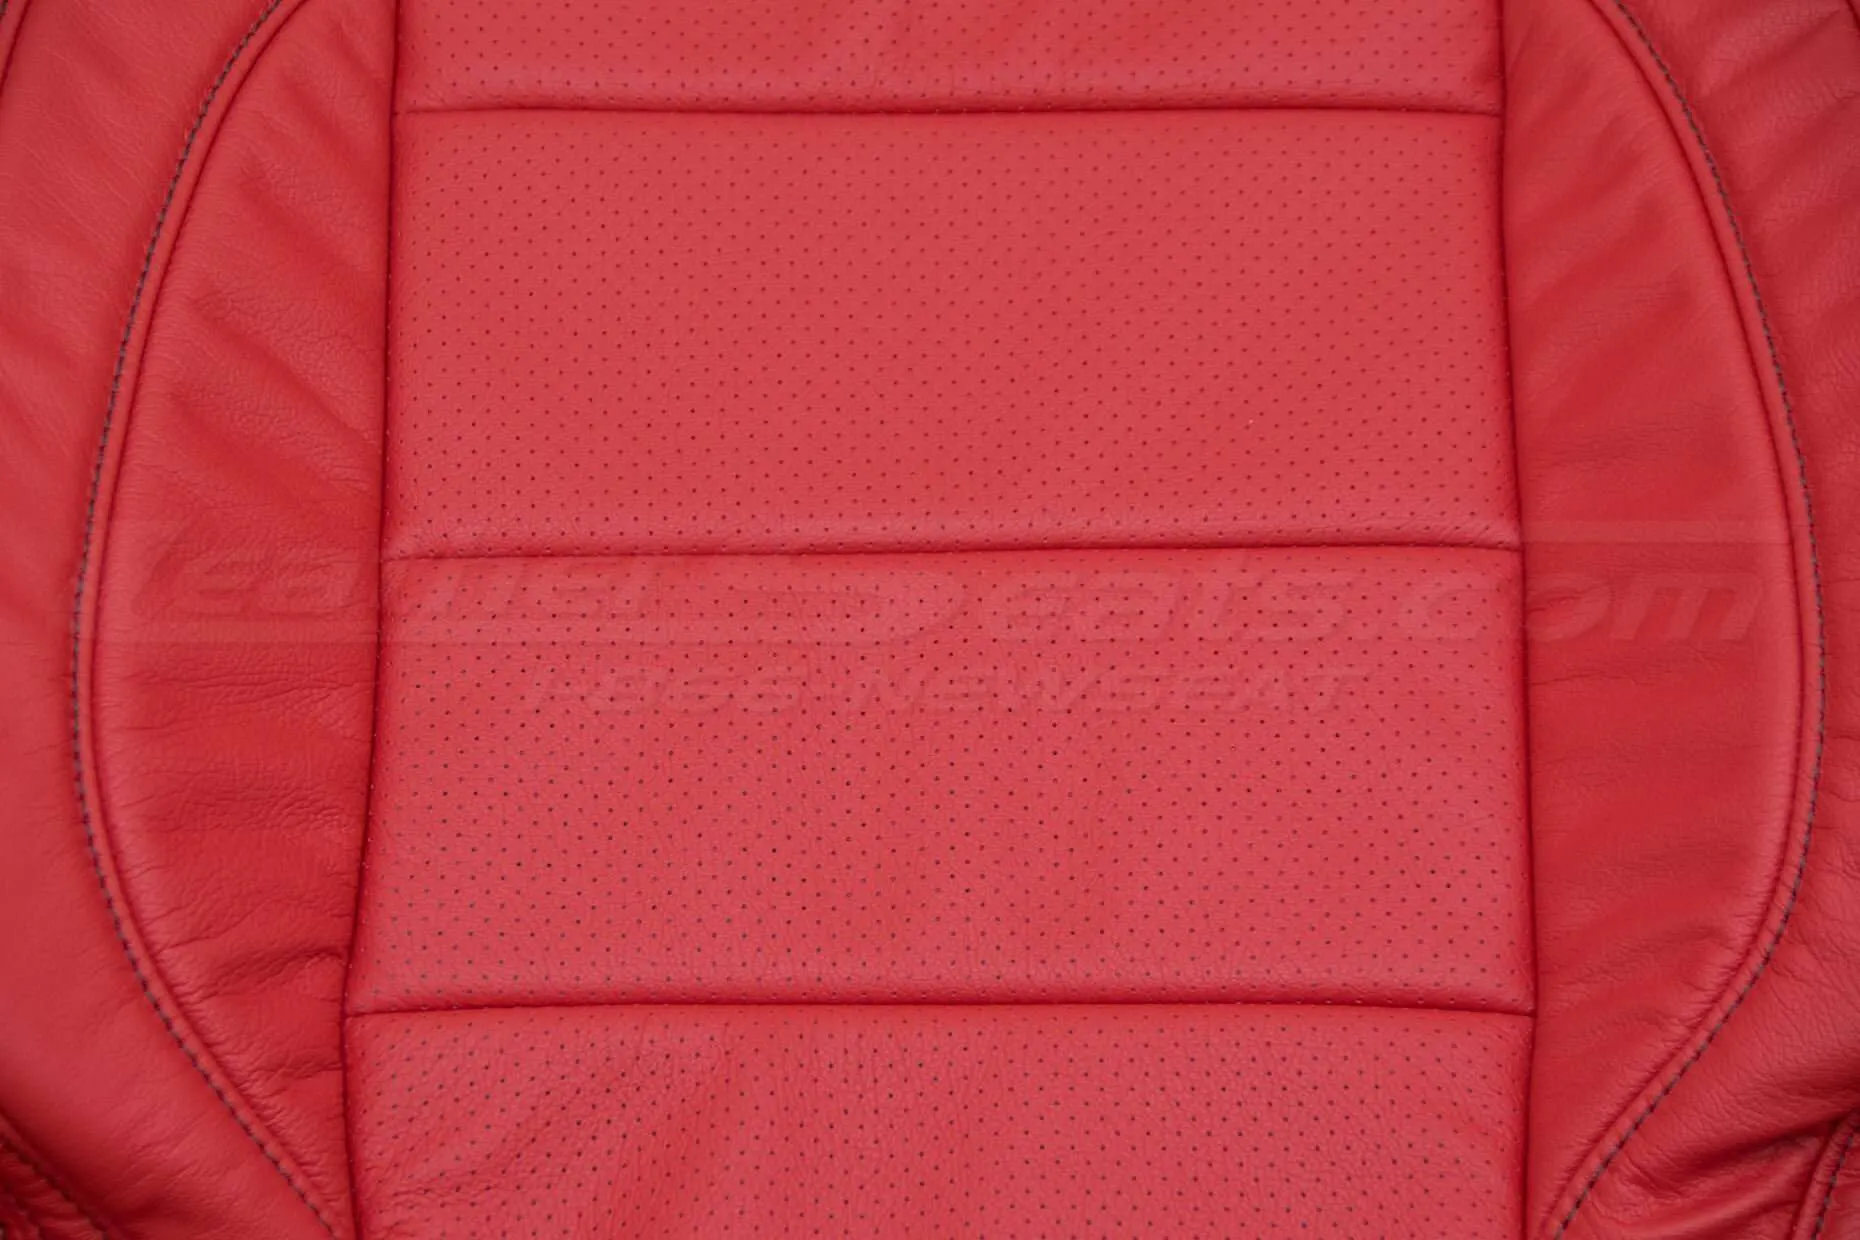 Ford Mustang Bright Red Upholstery Kit - Backrest insert perforation close-up